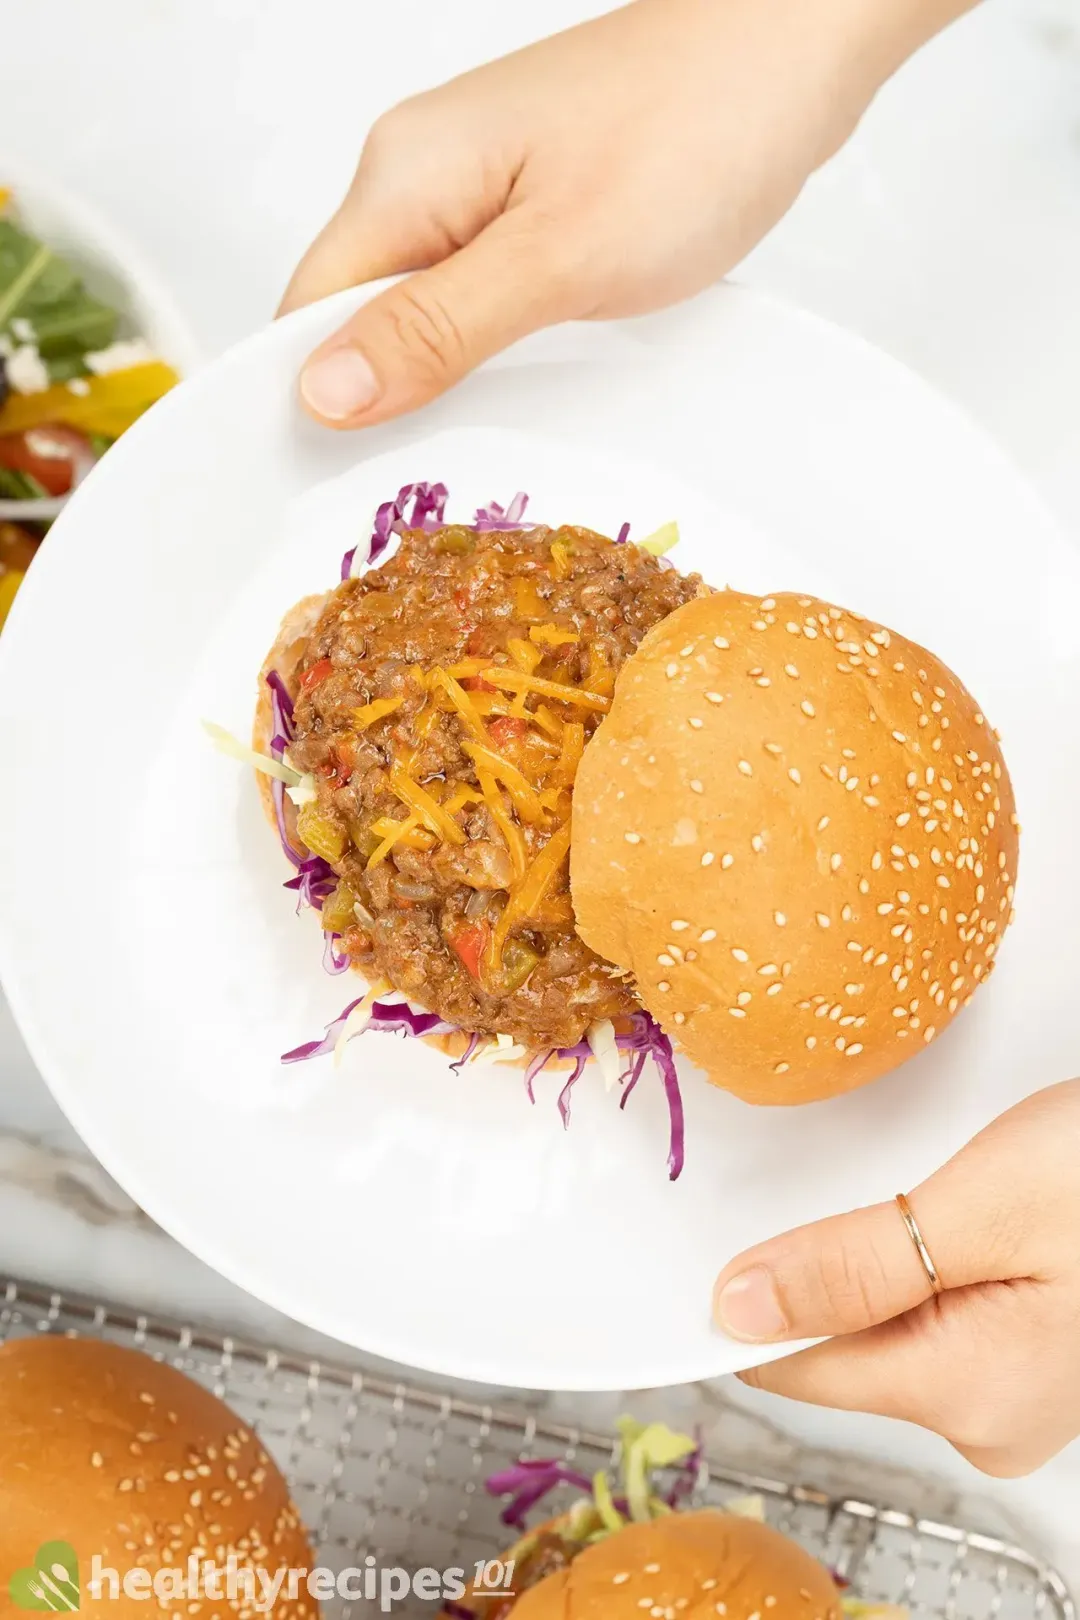 How to Store and Reheat Leftover Sloppy Joes